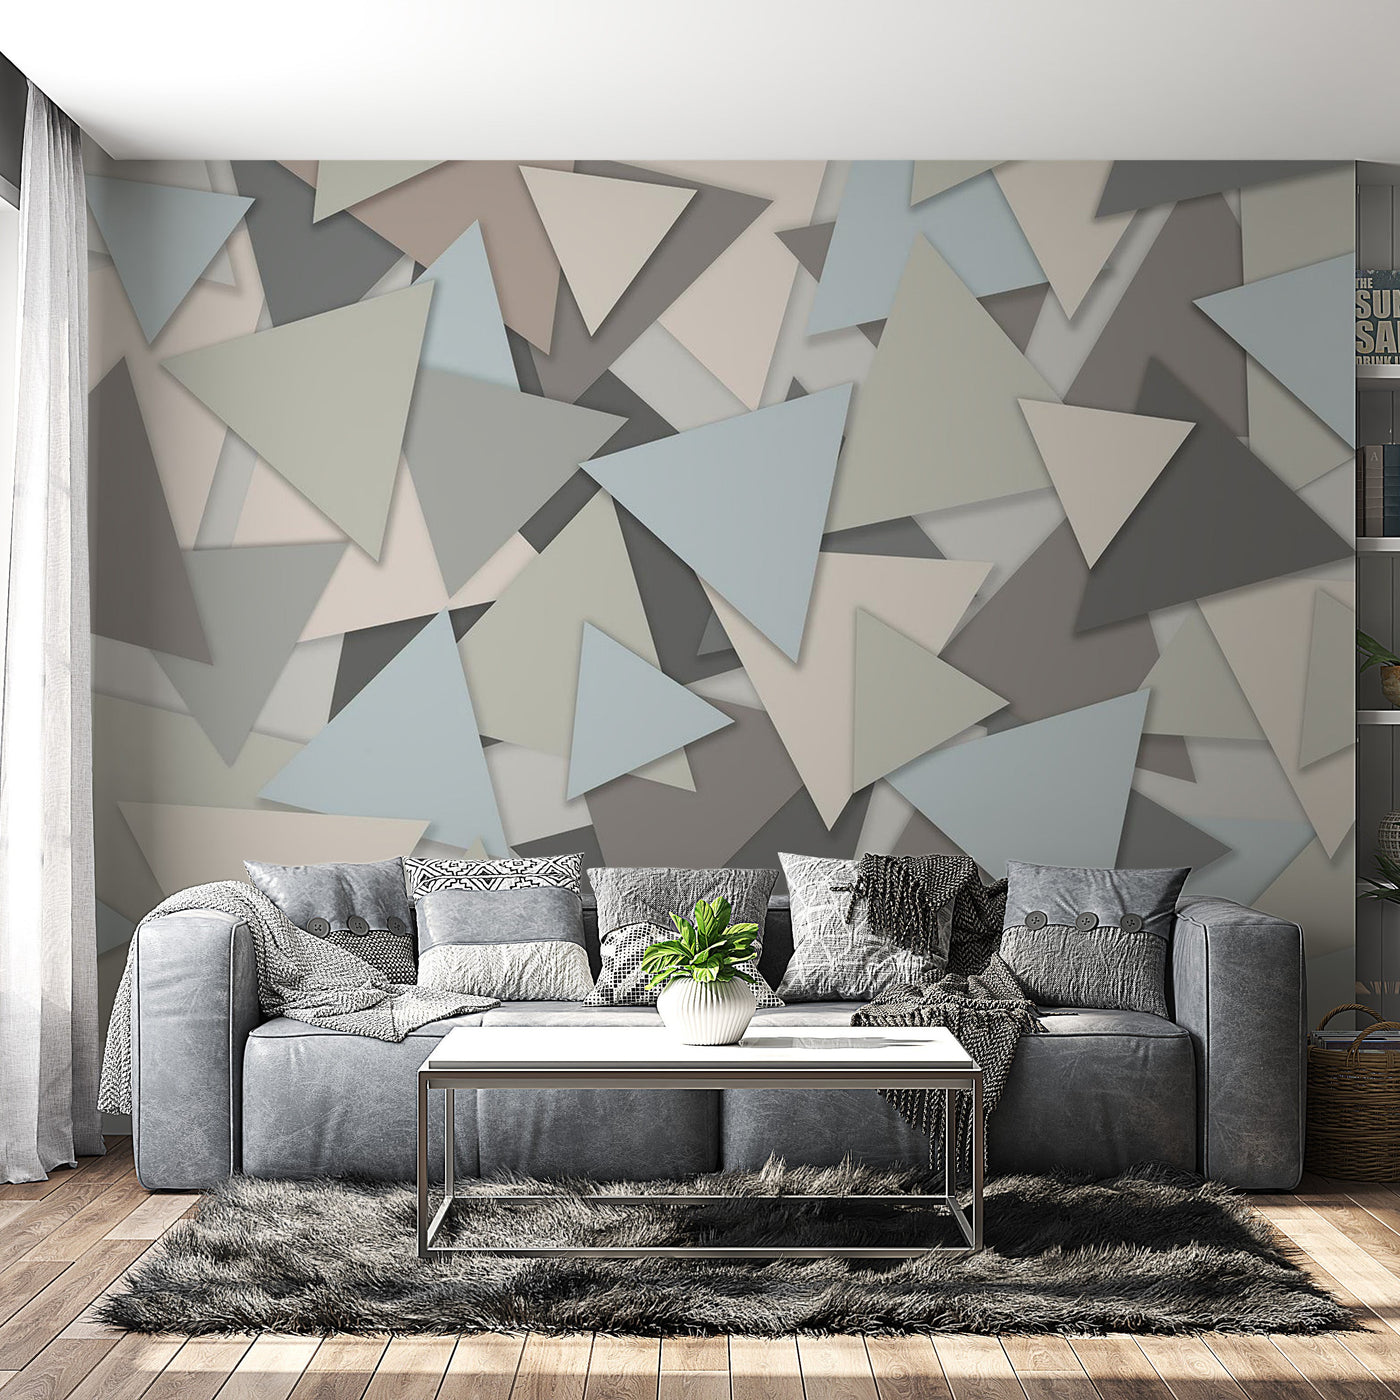 Peel & Stick Wall Mural - Geometric Abstract Triangle Puzzle - Removable Wall Decals